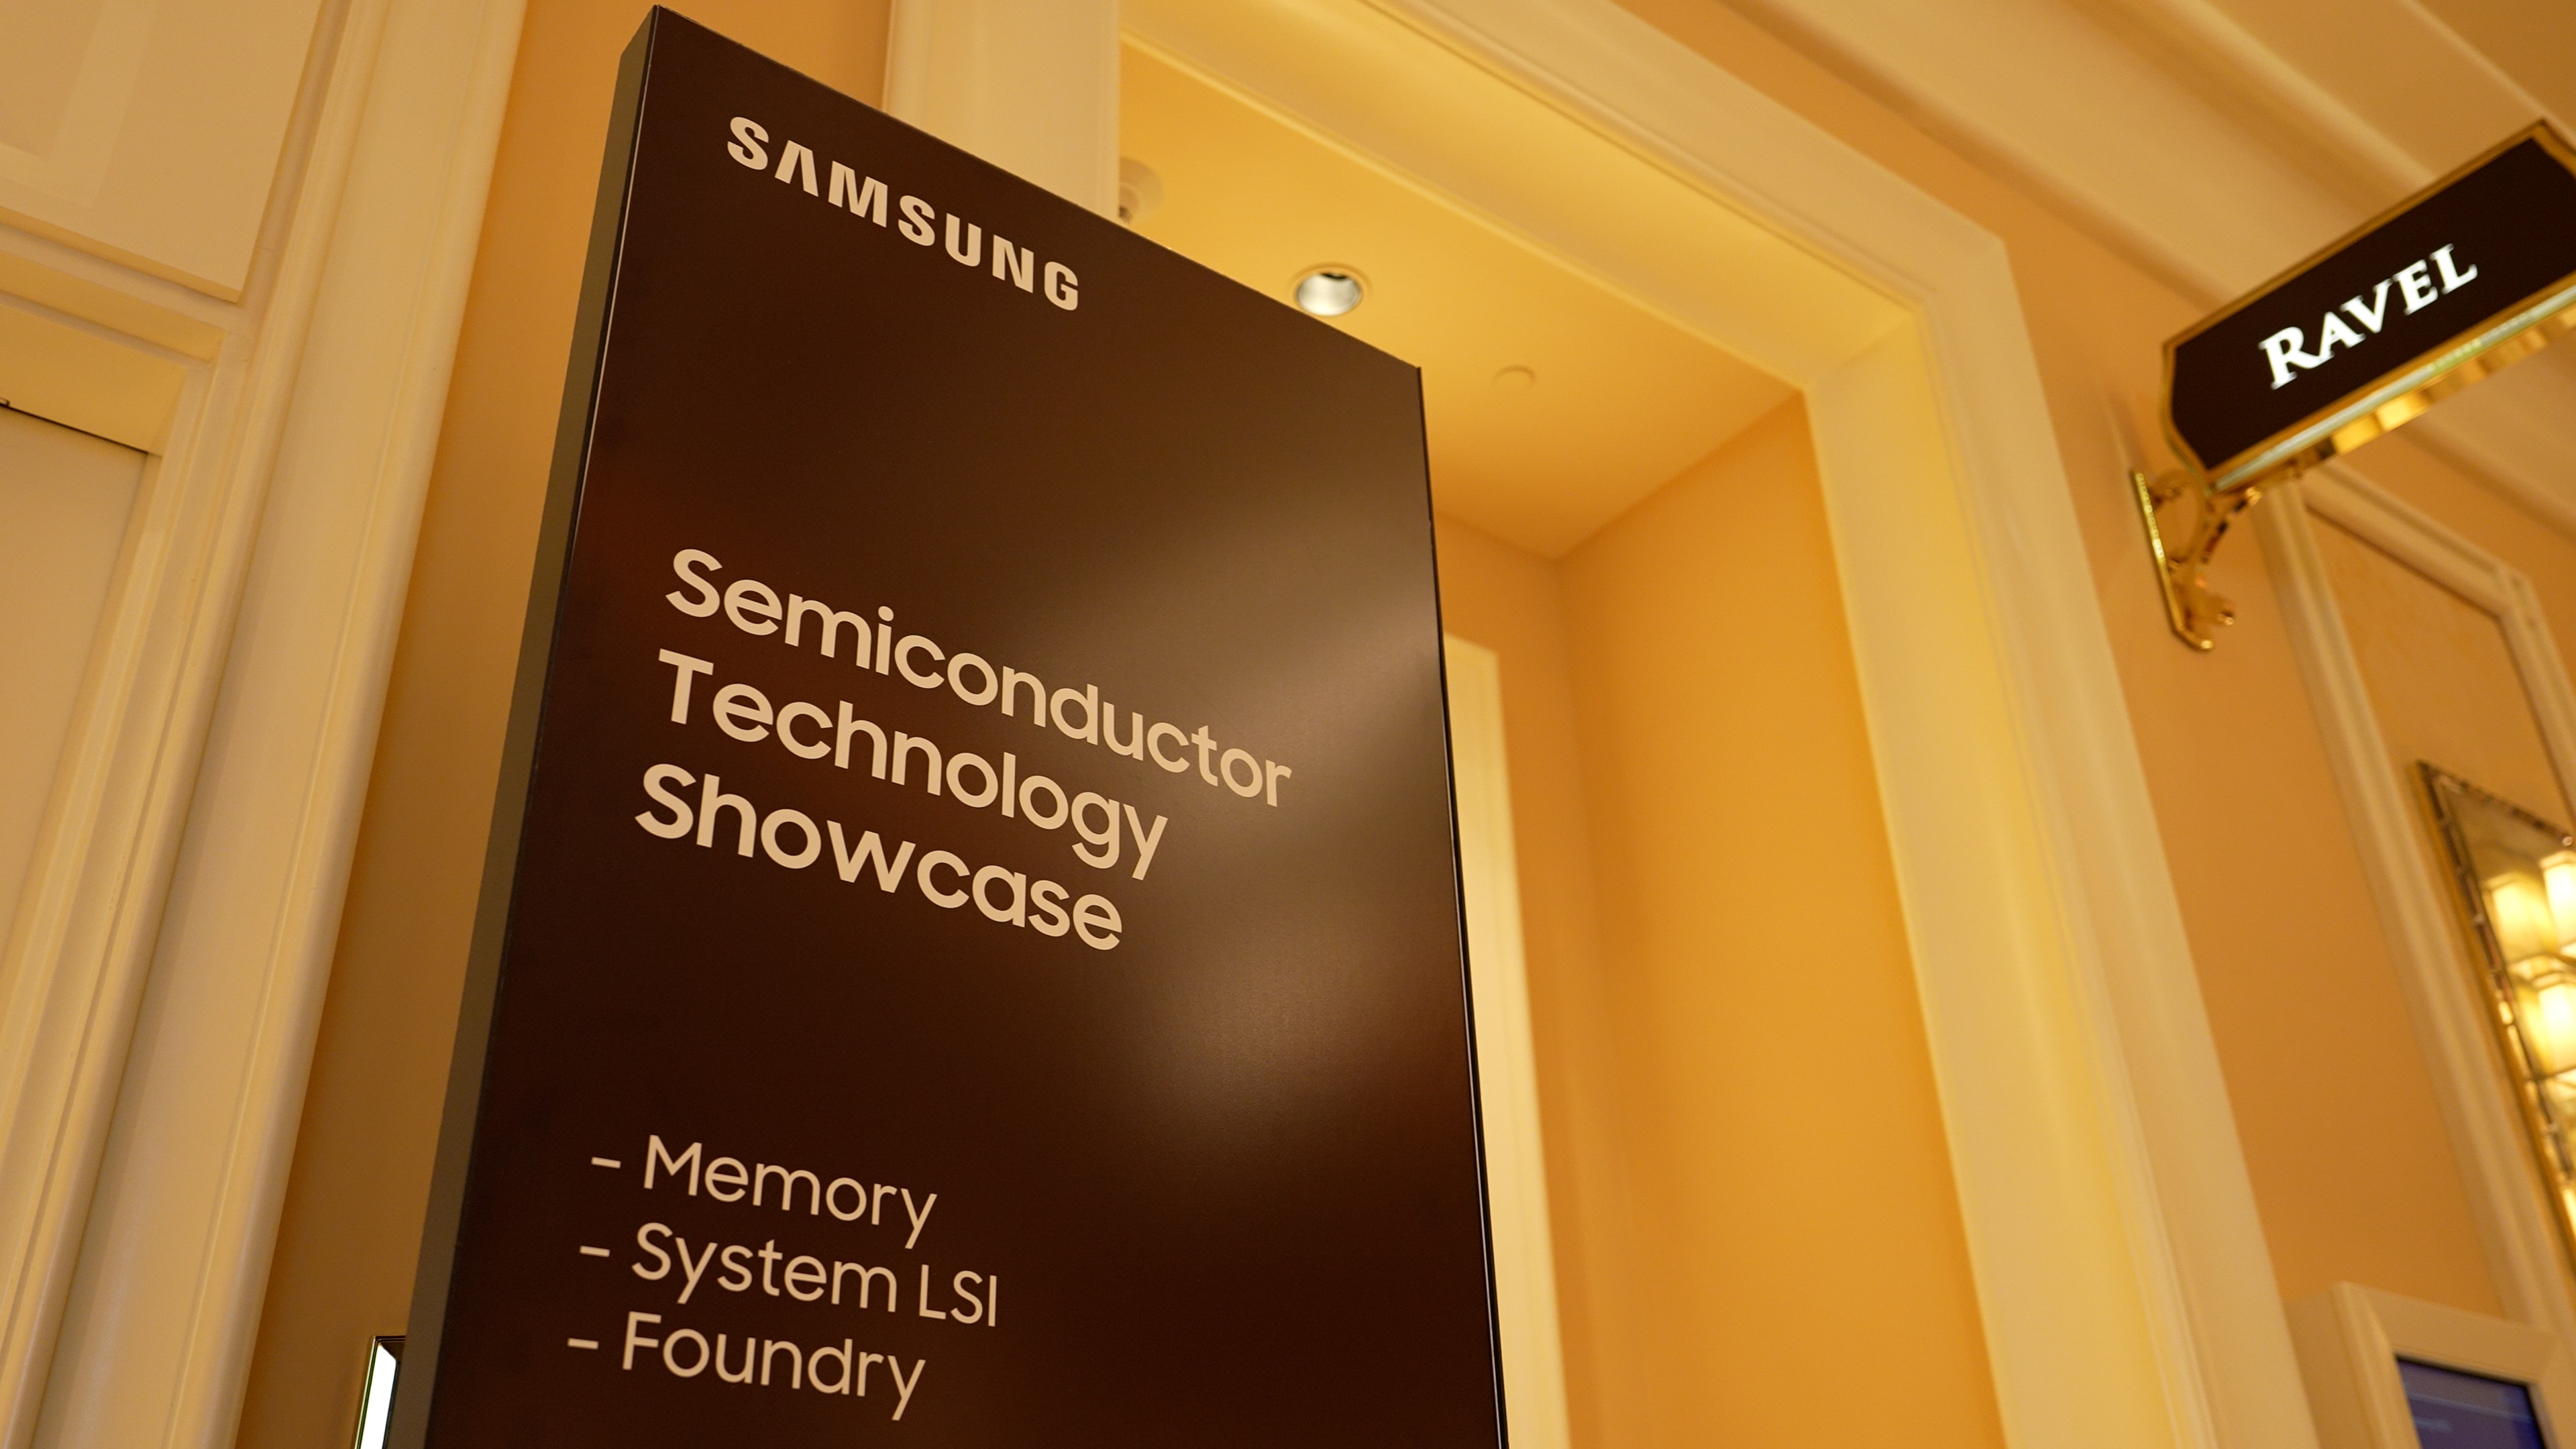 Samsung’s Semiconductor Technology Showcase at the Encore At Wynn Hotel, highlights the latest Samsung memory and storage technologies as well as provides a glimpse into the future.